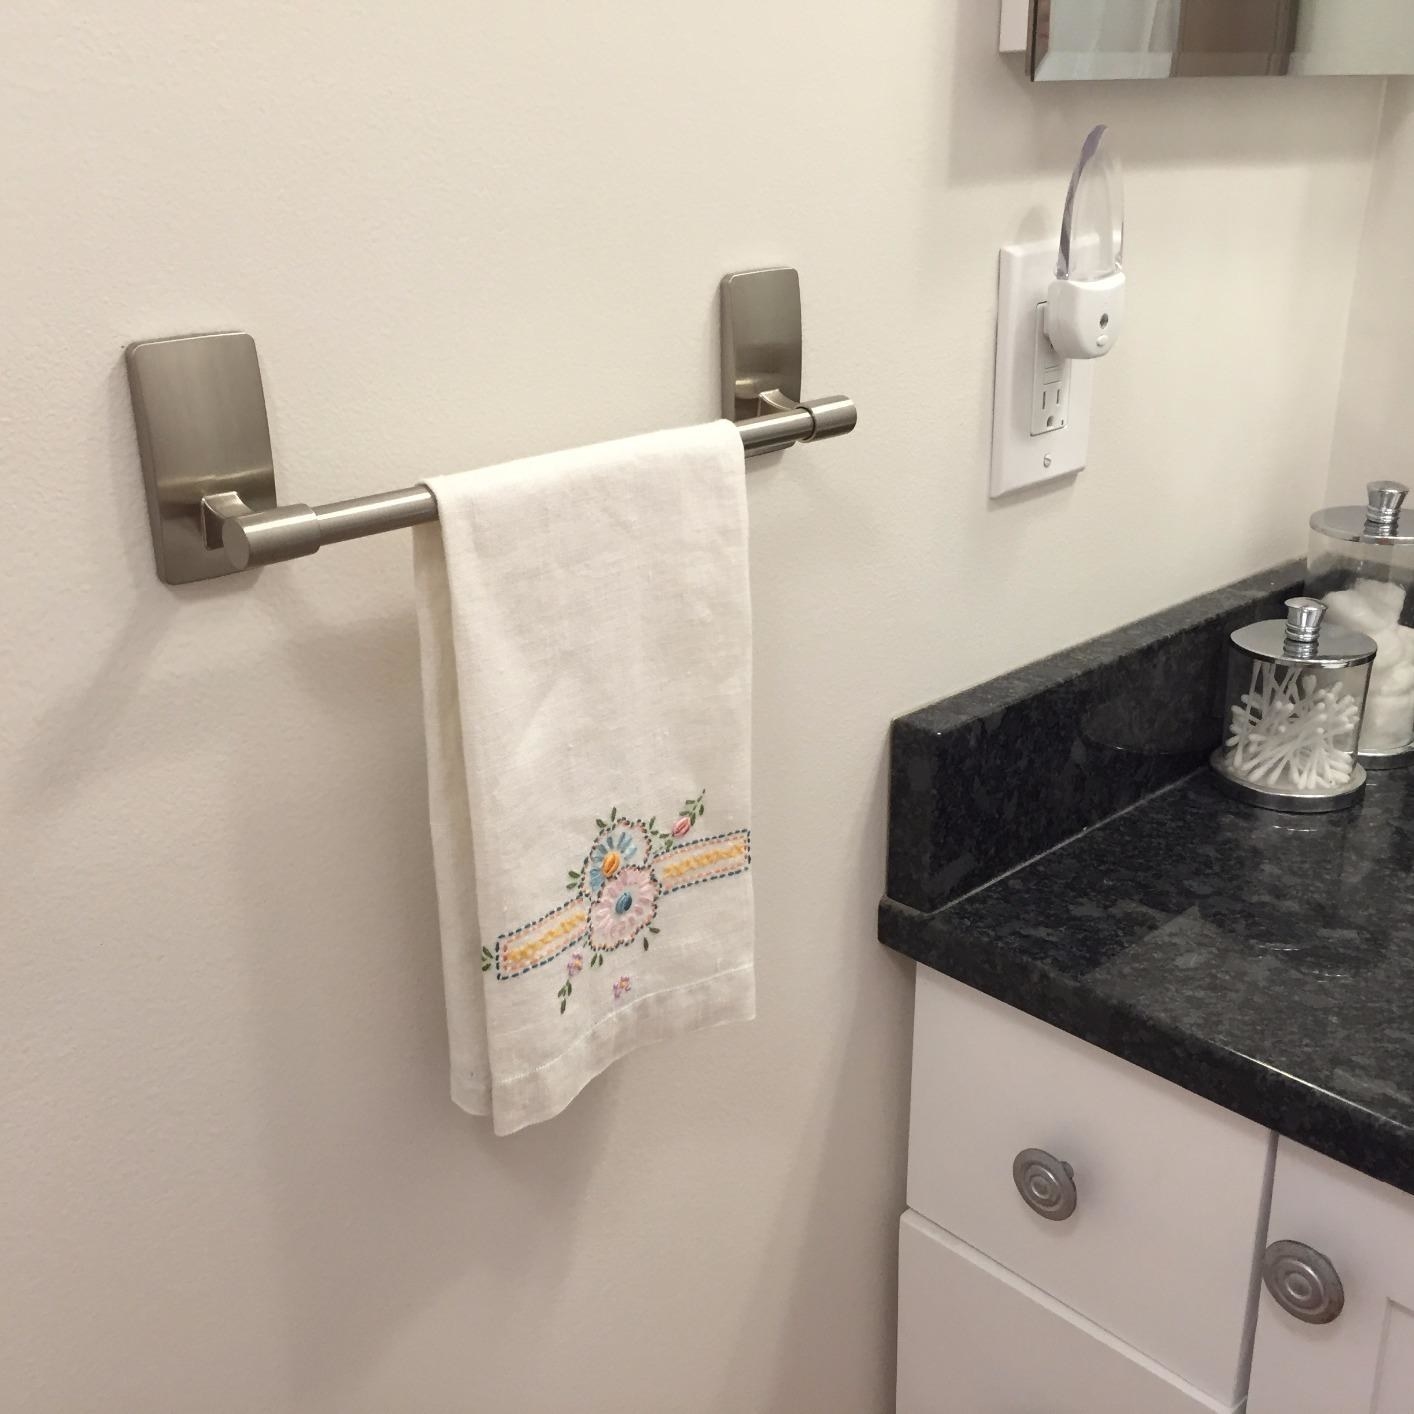 the silvery towel bar mounted on a reviewer's wall